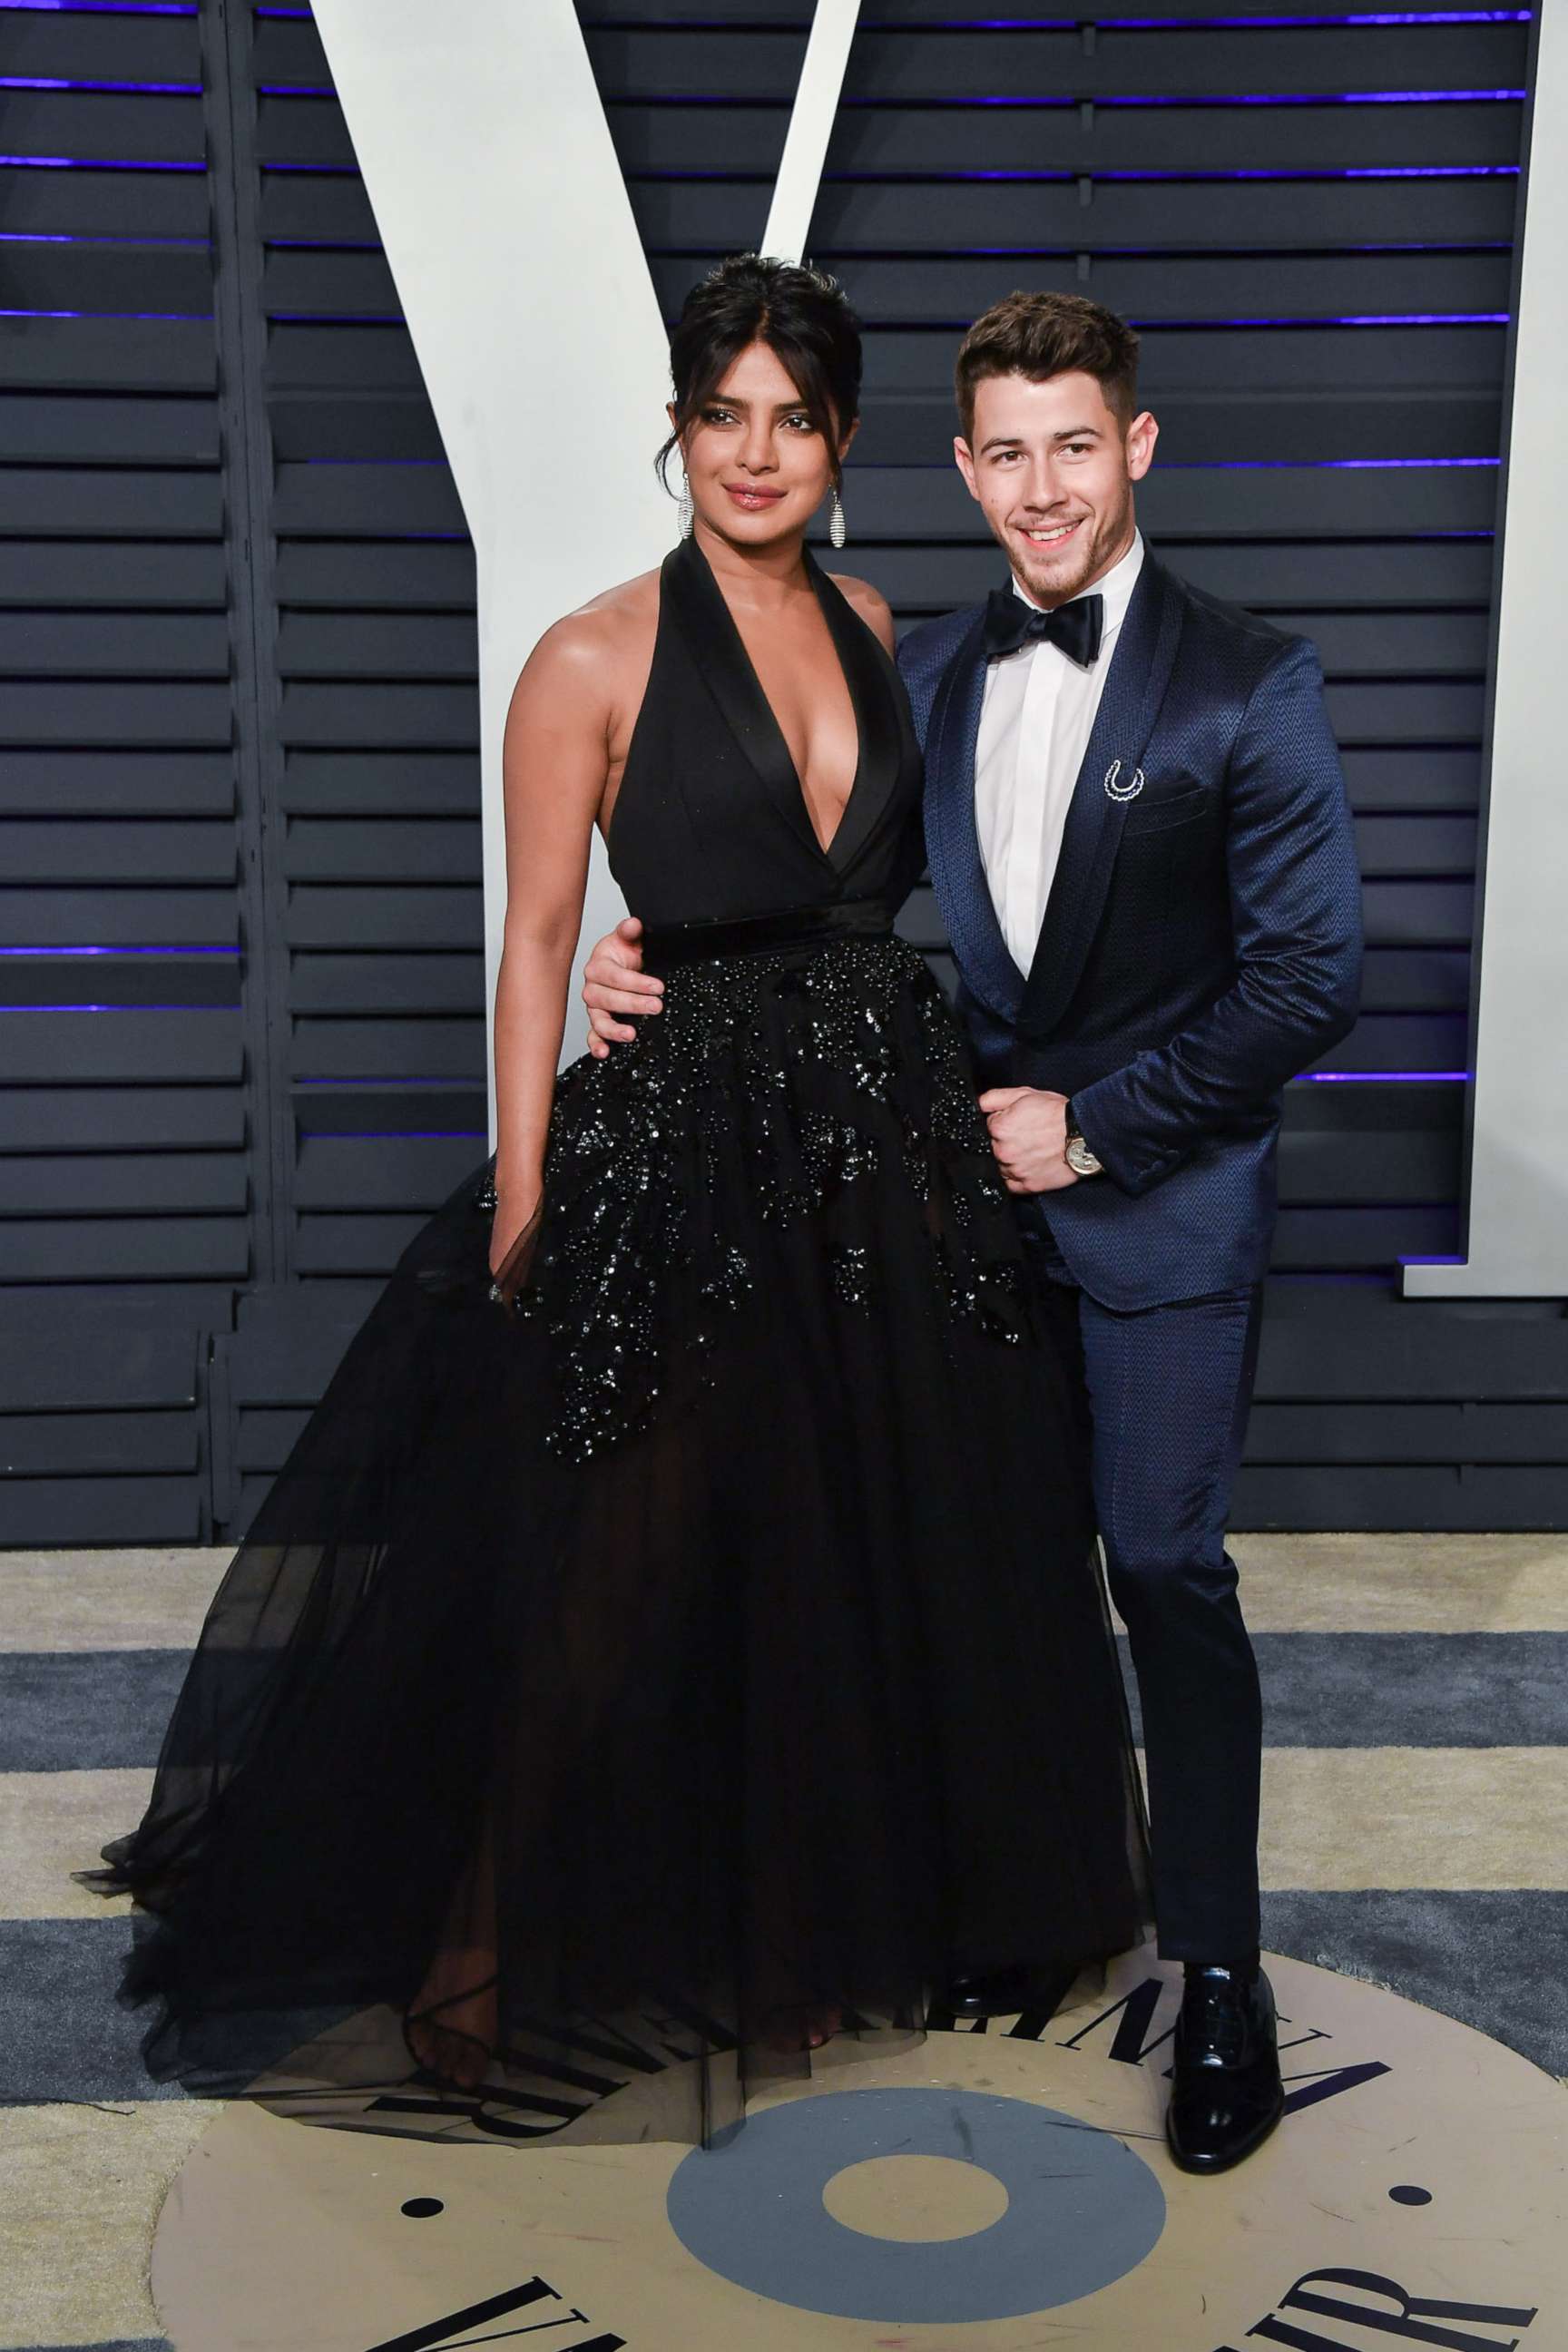 PHOTO: Priyanka Chopra and Nick Jonas attend the 2019 Vanity Fair Oscar Party hosted by Radhika Jones at Wallis Annenberg Center for the Performing Arts on Feb. 24, 2019, in Beverly Hills, Calif.